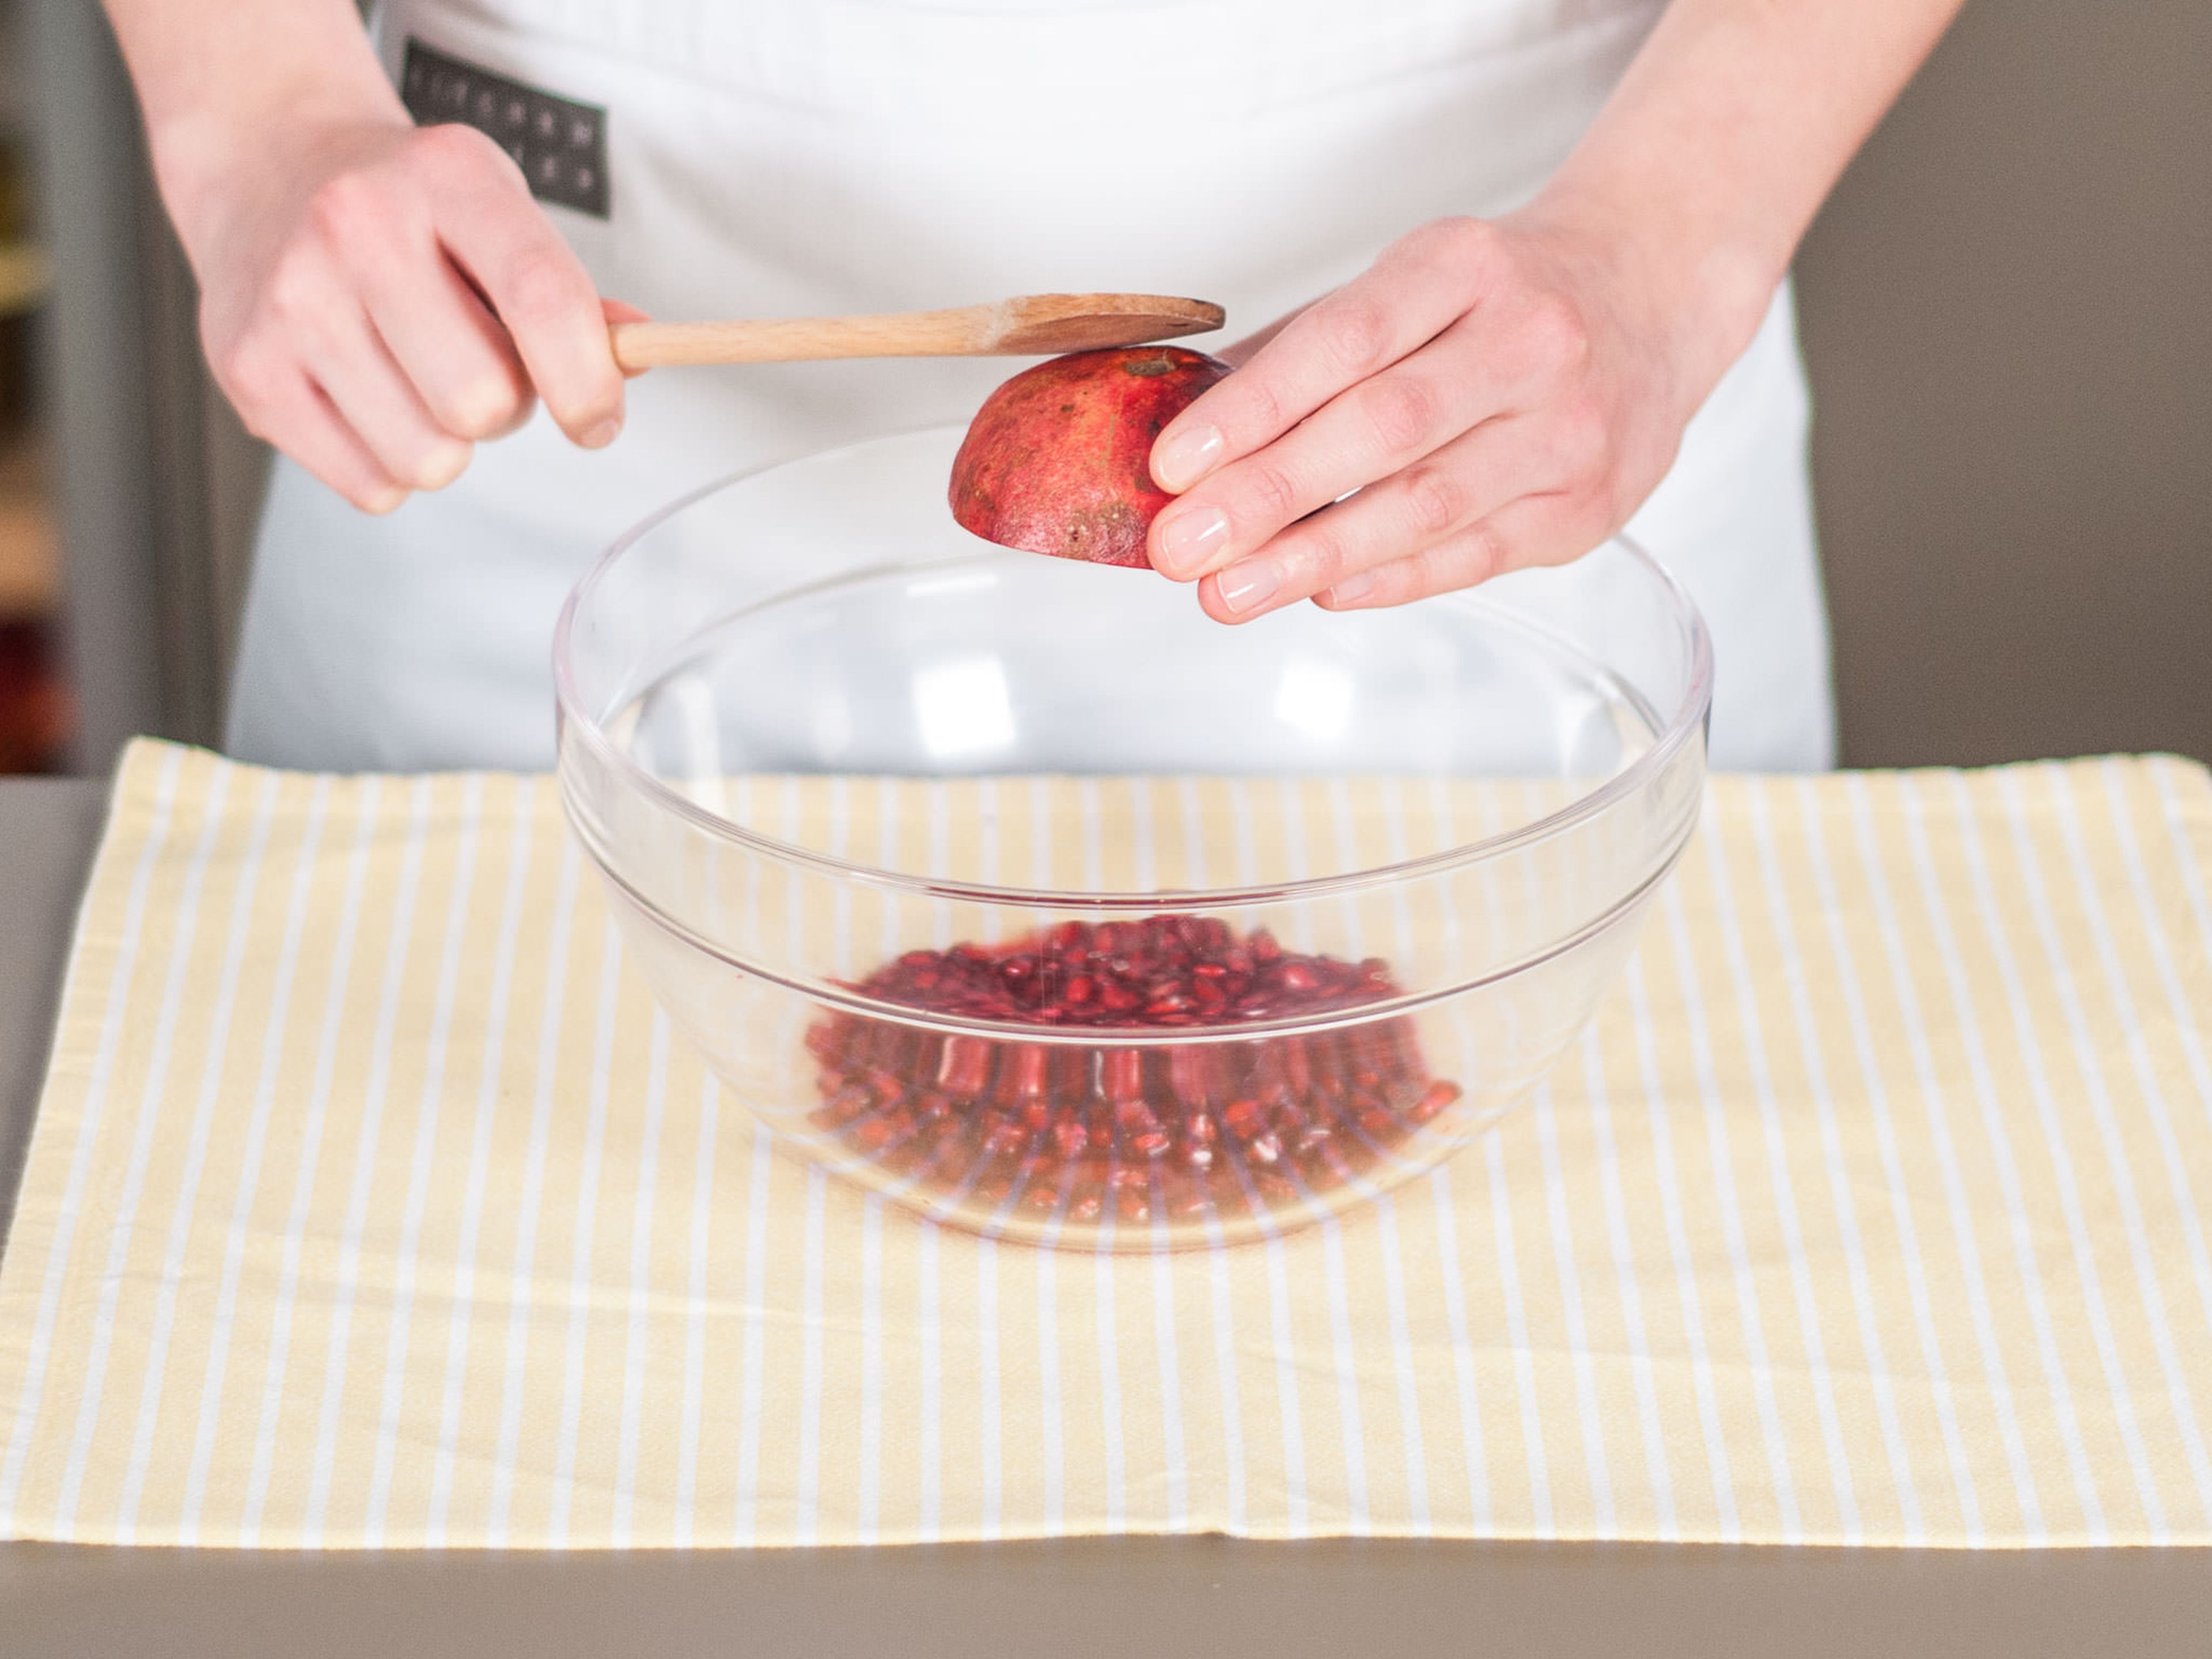 Remove pomegranate seeds and add to large bowl. For easy seed removal, first roll pomegranate on counter to loosen seeds, cut in half, and hold each half over the bowl while tapping firmly with wooden spoon.